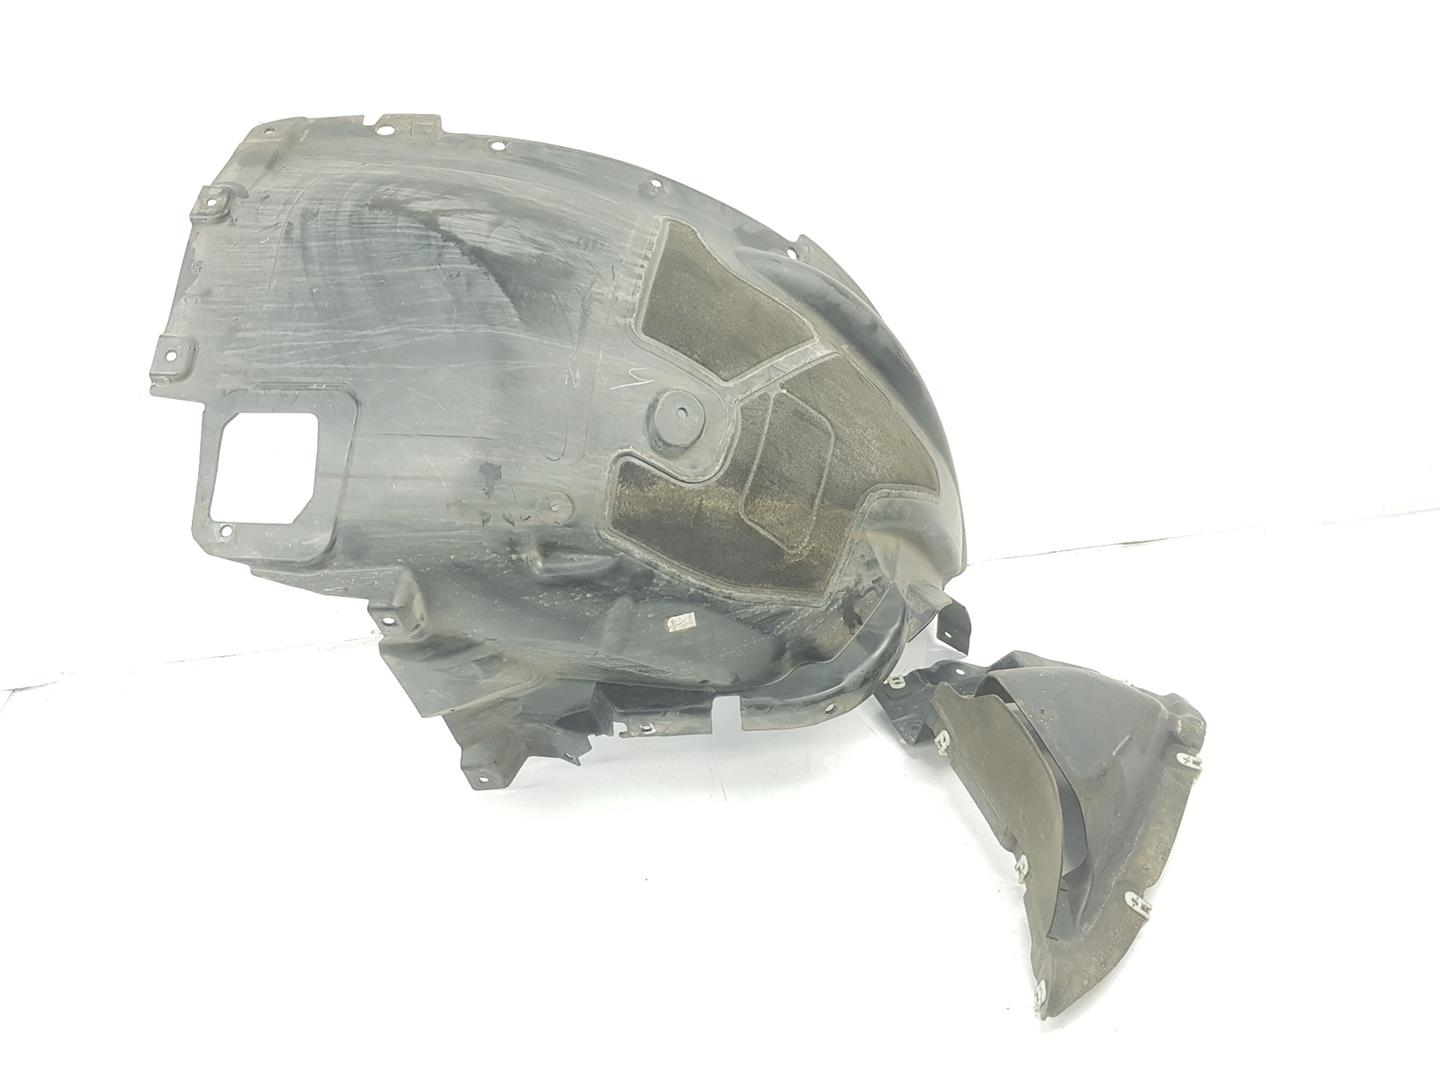 BMW X5 F15 (2013-2018) Other Body Parts 7290853, 51717290853, 1212CD 19827727